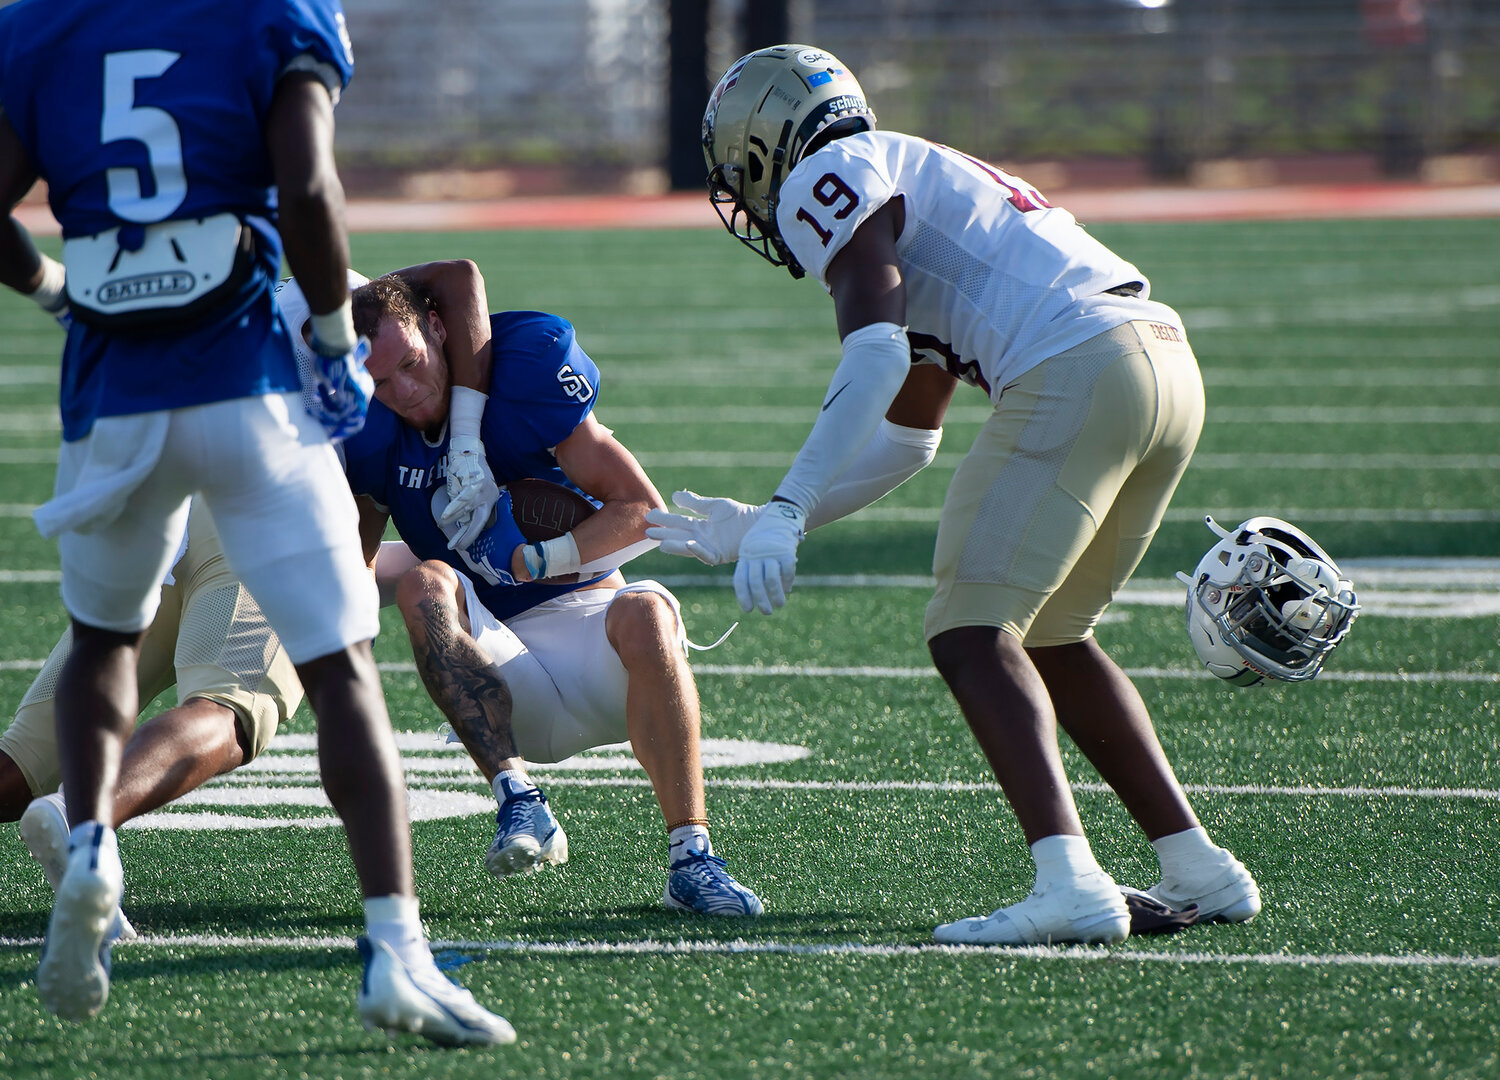 Shorter University's Bo Mosteller loses his helmet as he is tackled by Erskine College's Donovan Bush, as Erskine's Johnmond Howard (19) looks on, during the fourth quarter Saturday, Sept. 9, 2023, in Rome, Ga. Shorter won 28-7. (Index/Henry Durand)